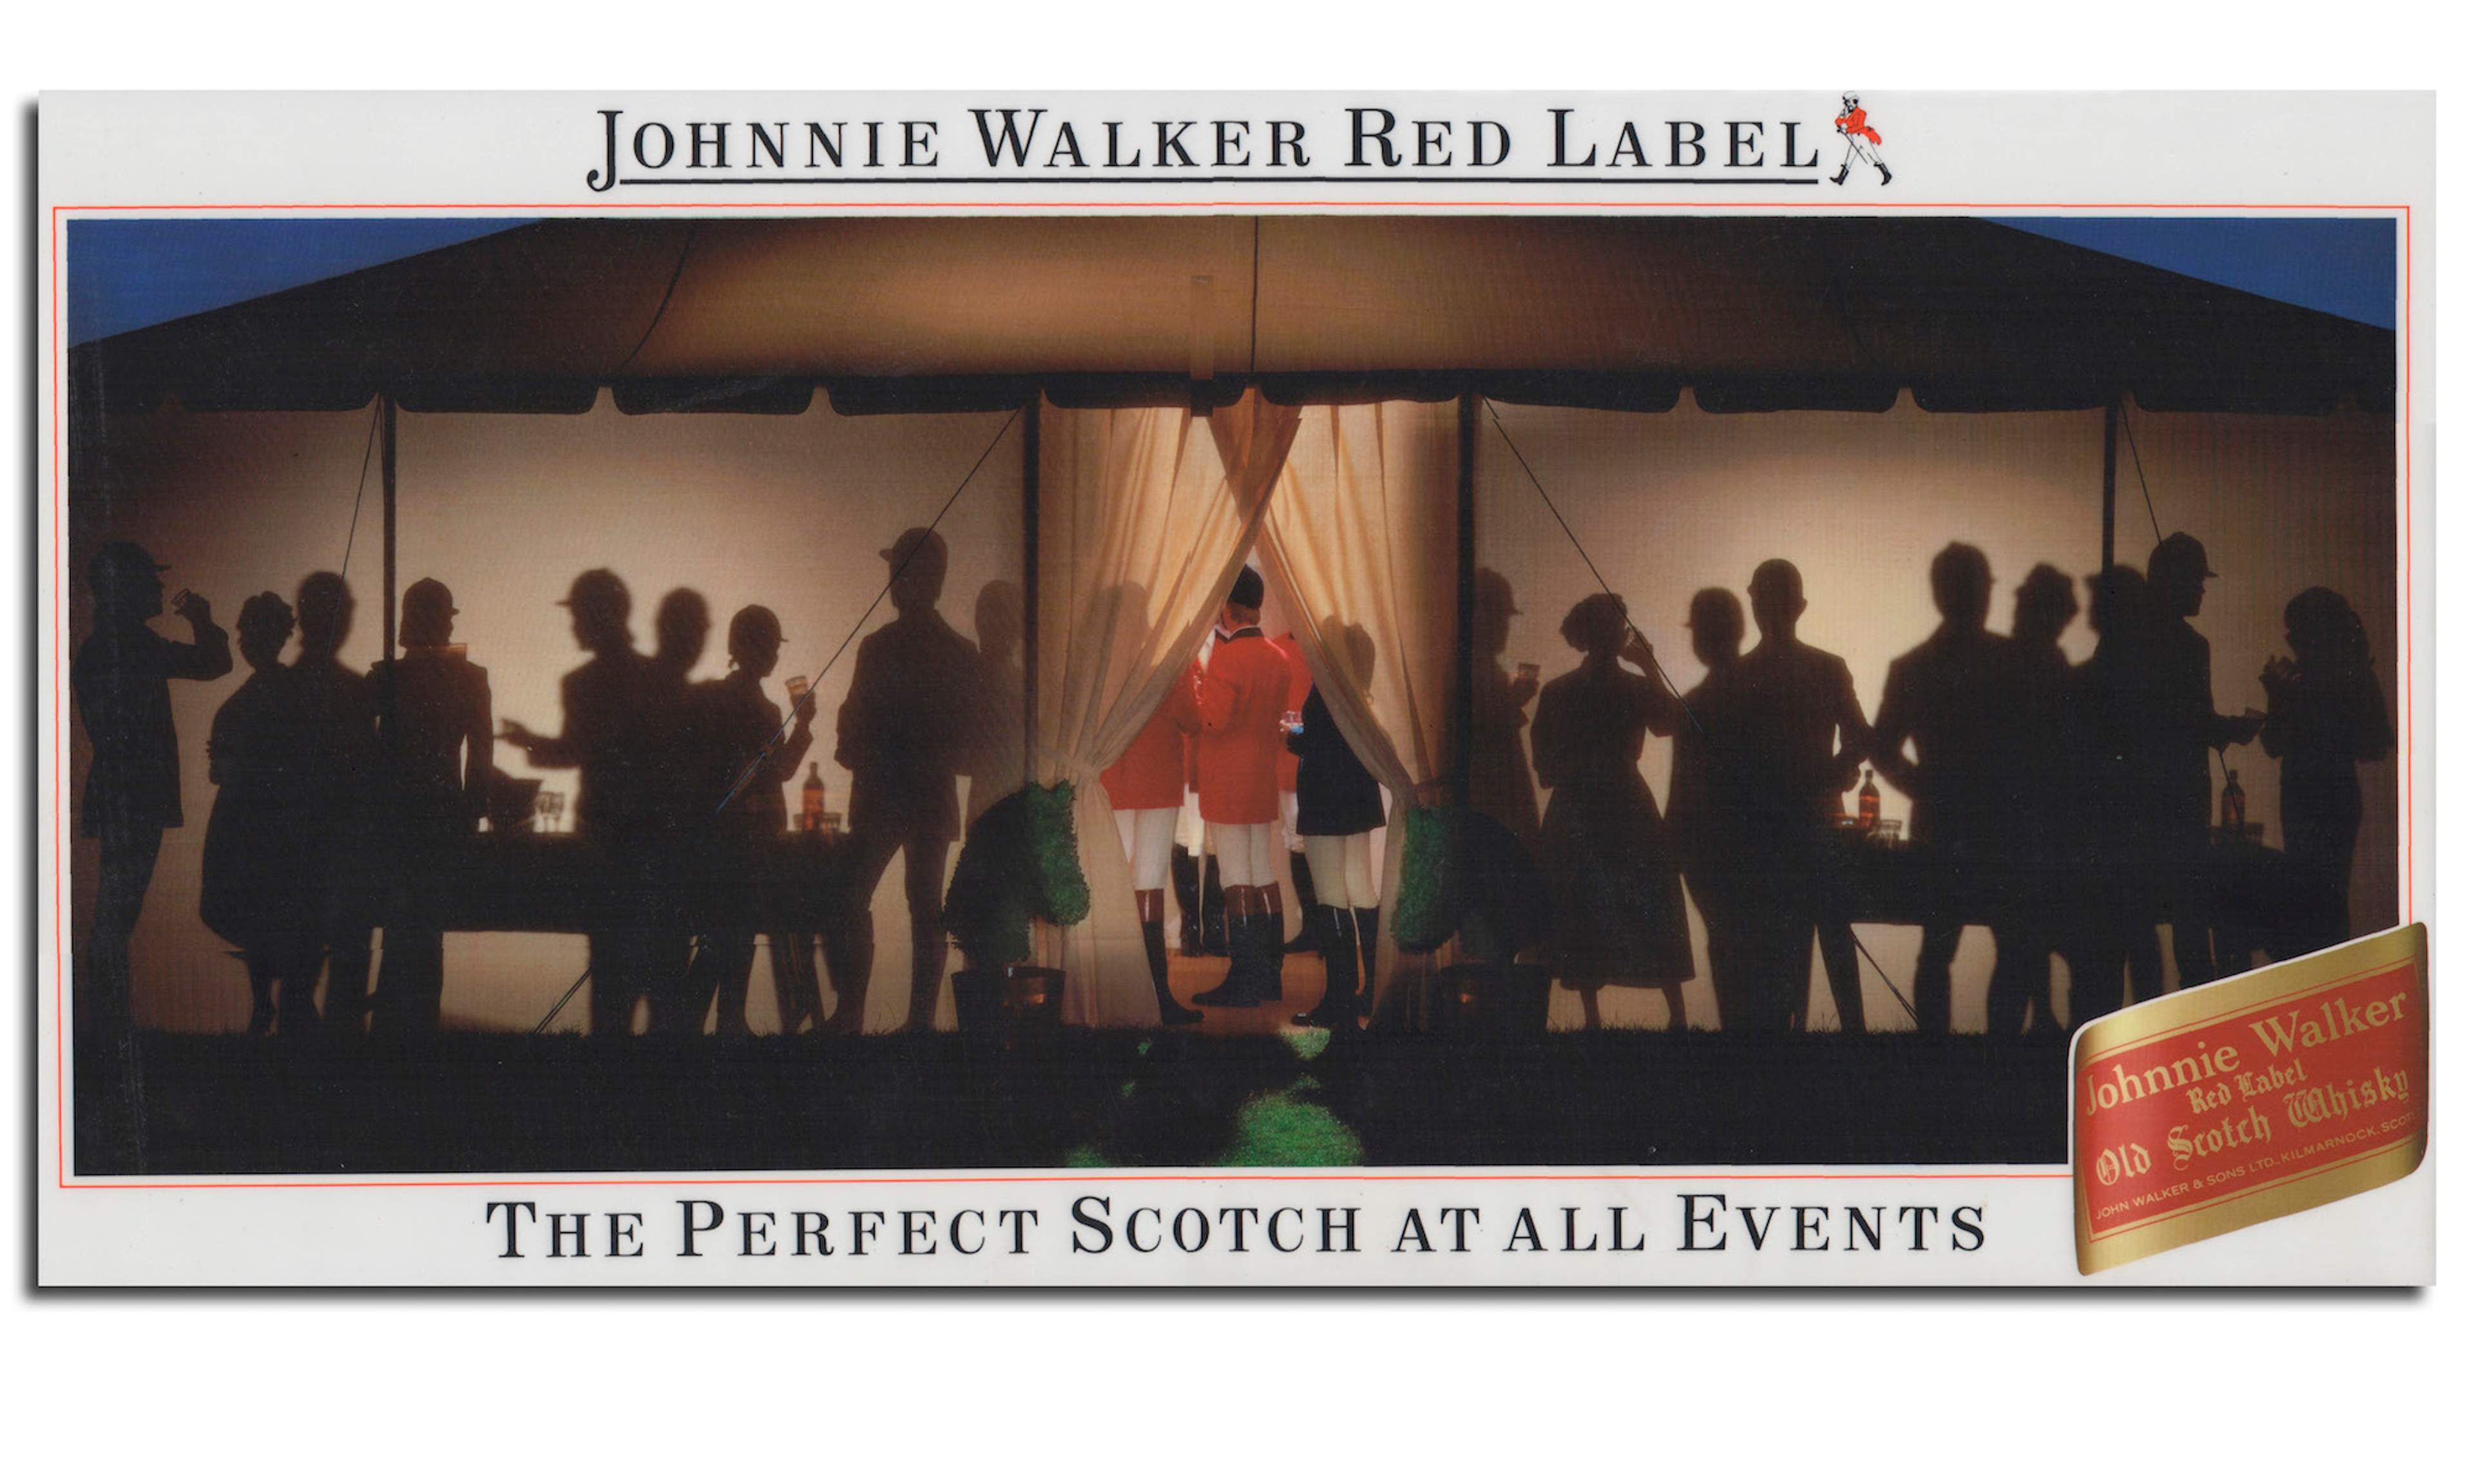 Johnnie Walker Red label 48-sheet poster showing a silhouette of showjumpers.